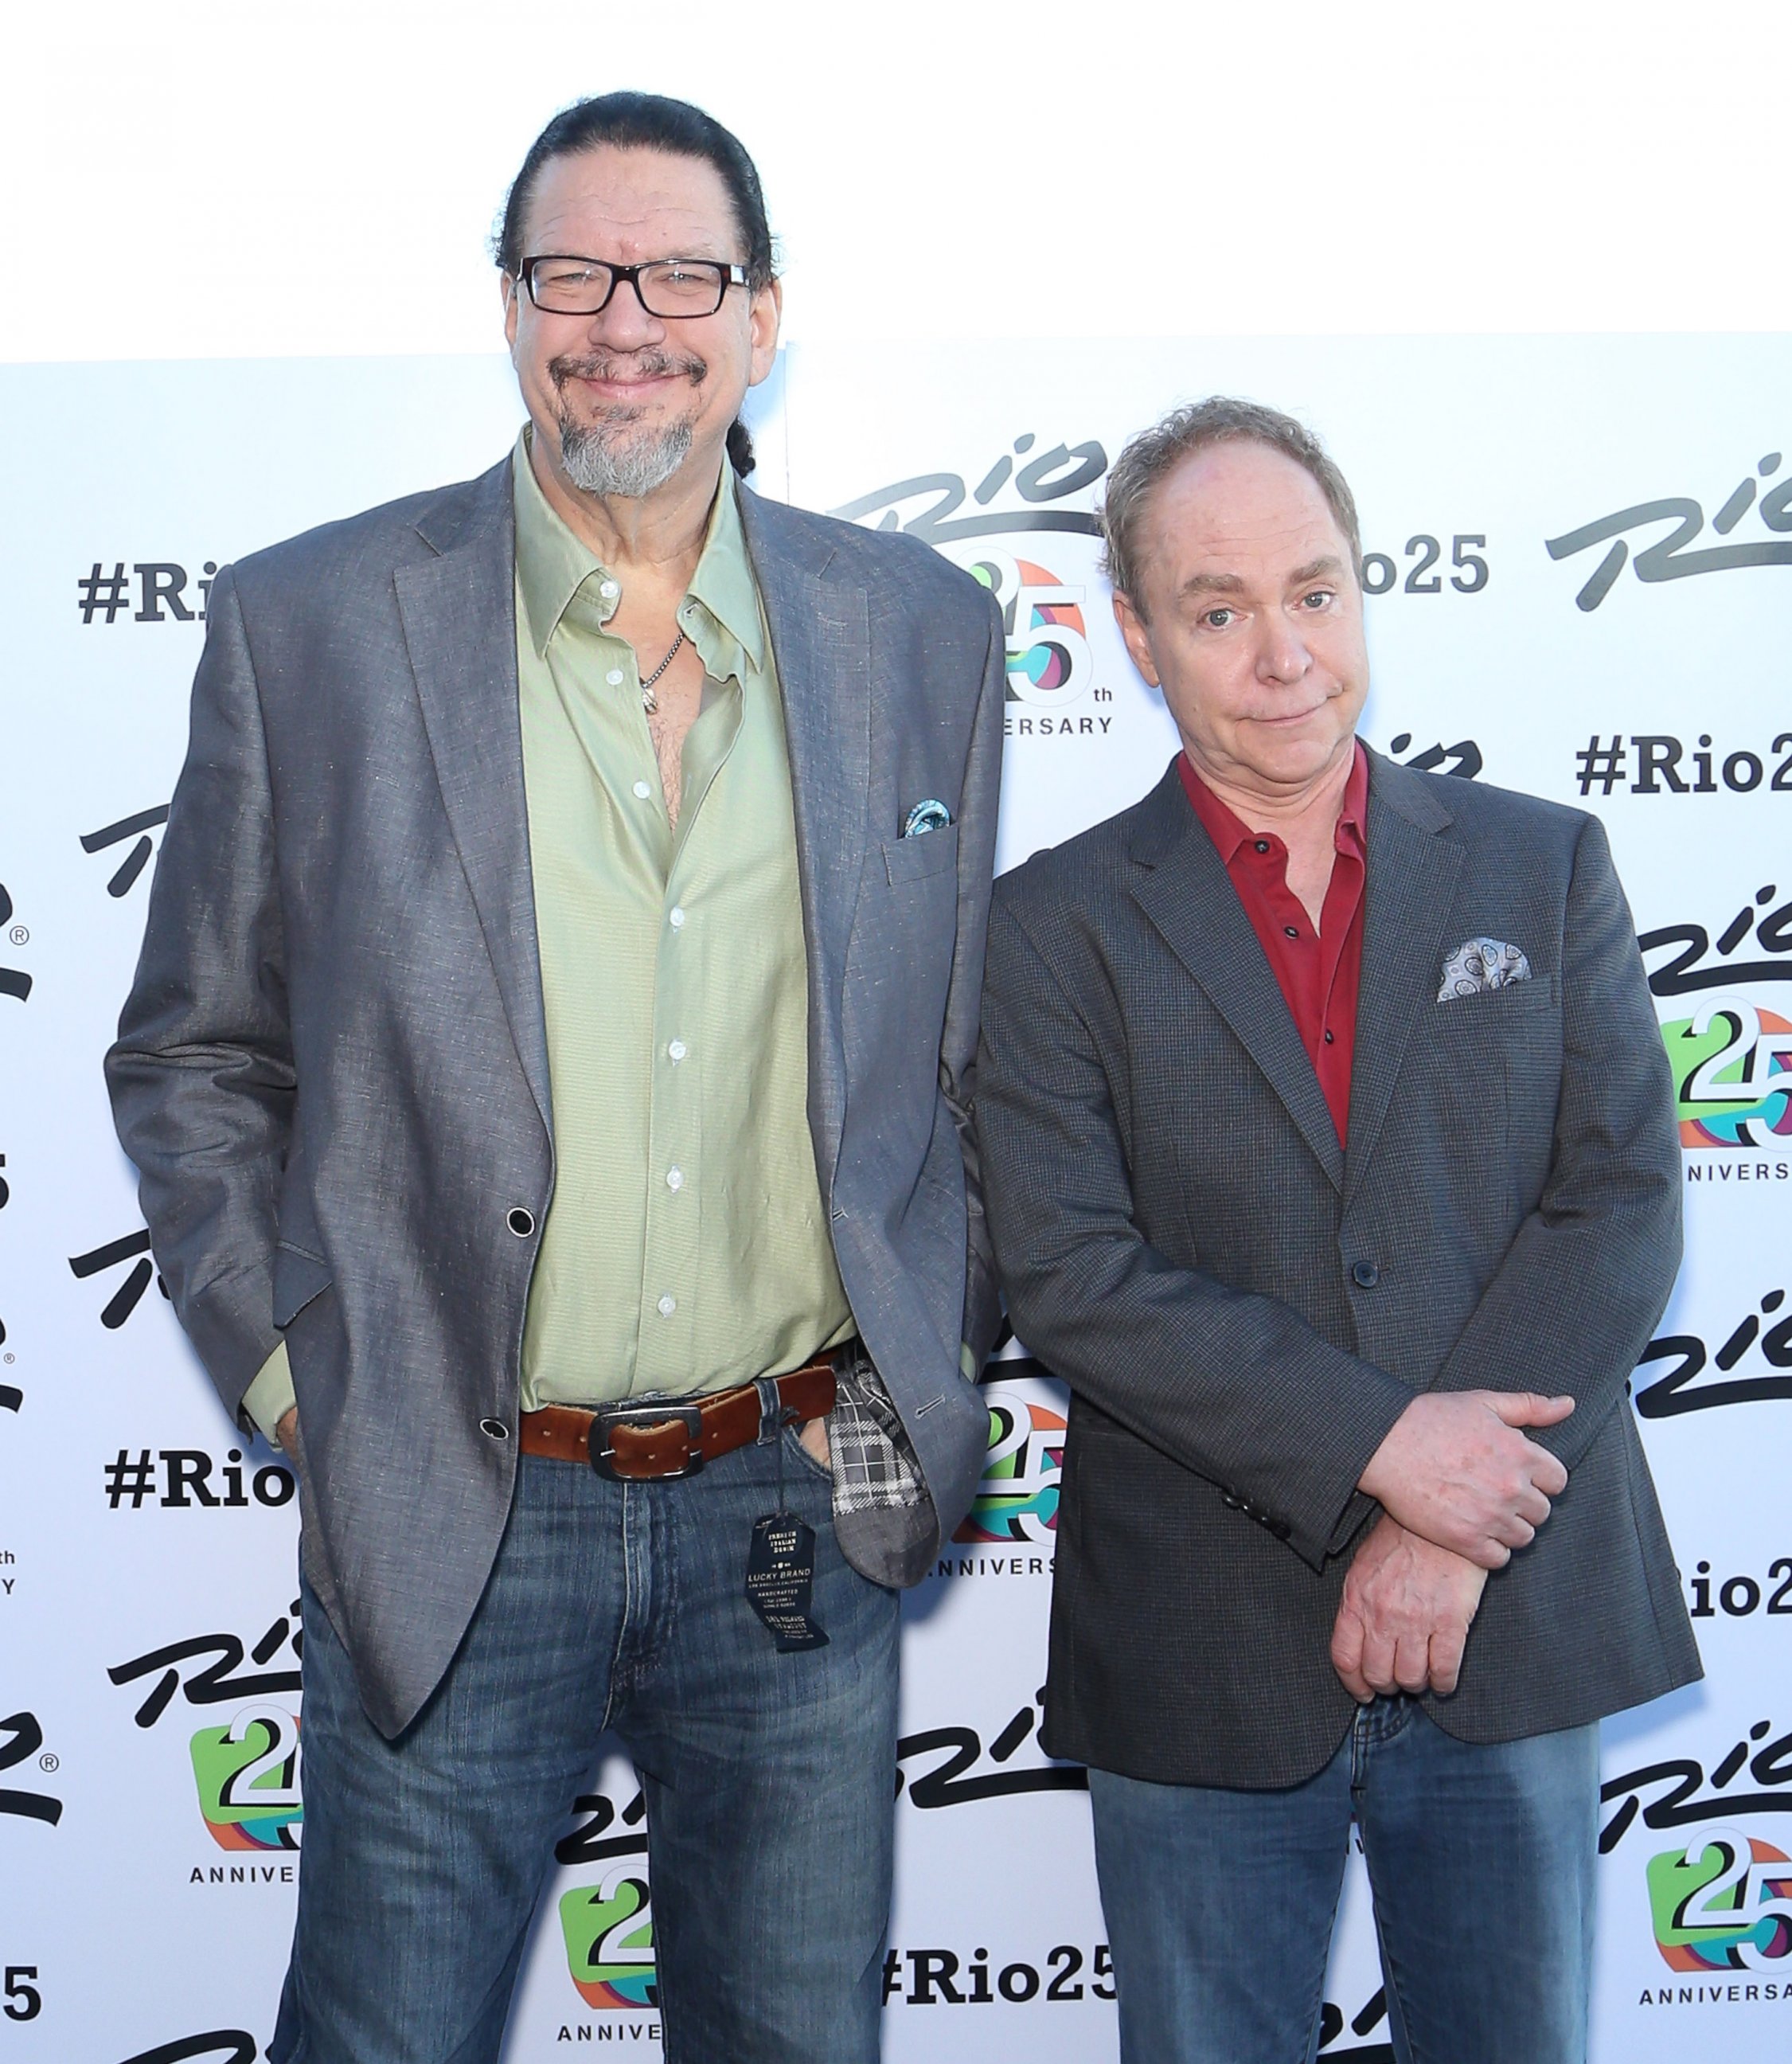 PHOTO: Penn Jillette and Teller of the comedy/magic team Penn & Teller arrive at the Voodoo Lounge at the Rio Hotel & Casino during the resort's silver anniversary celebration, Jan. 14, 2015, in Las Vegas.